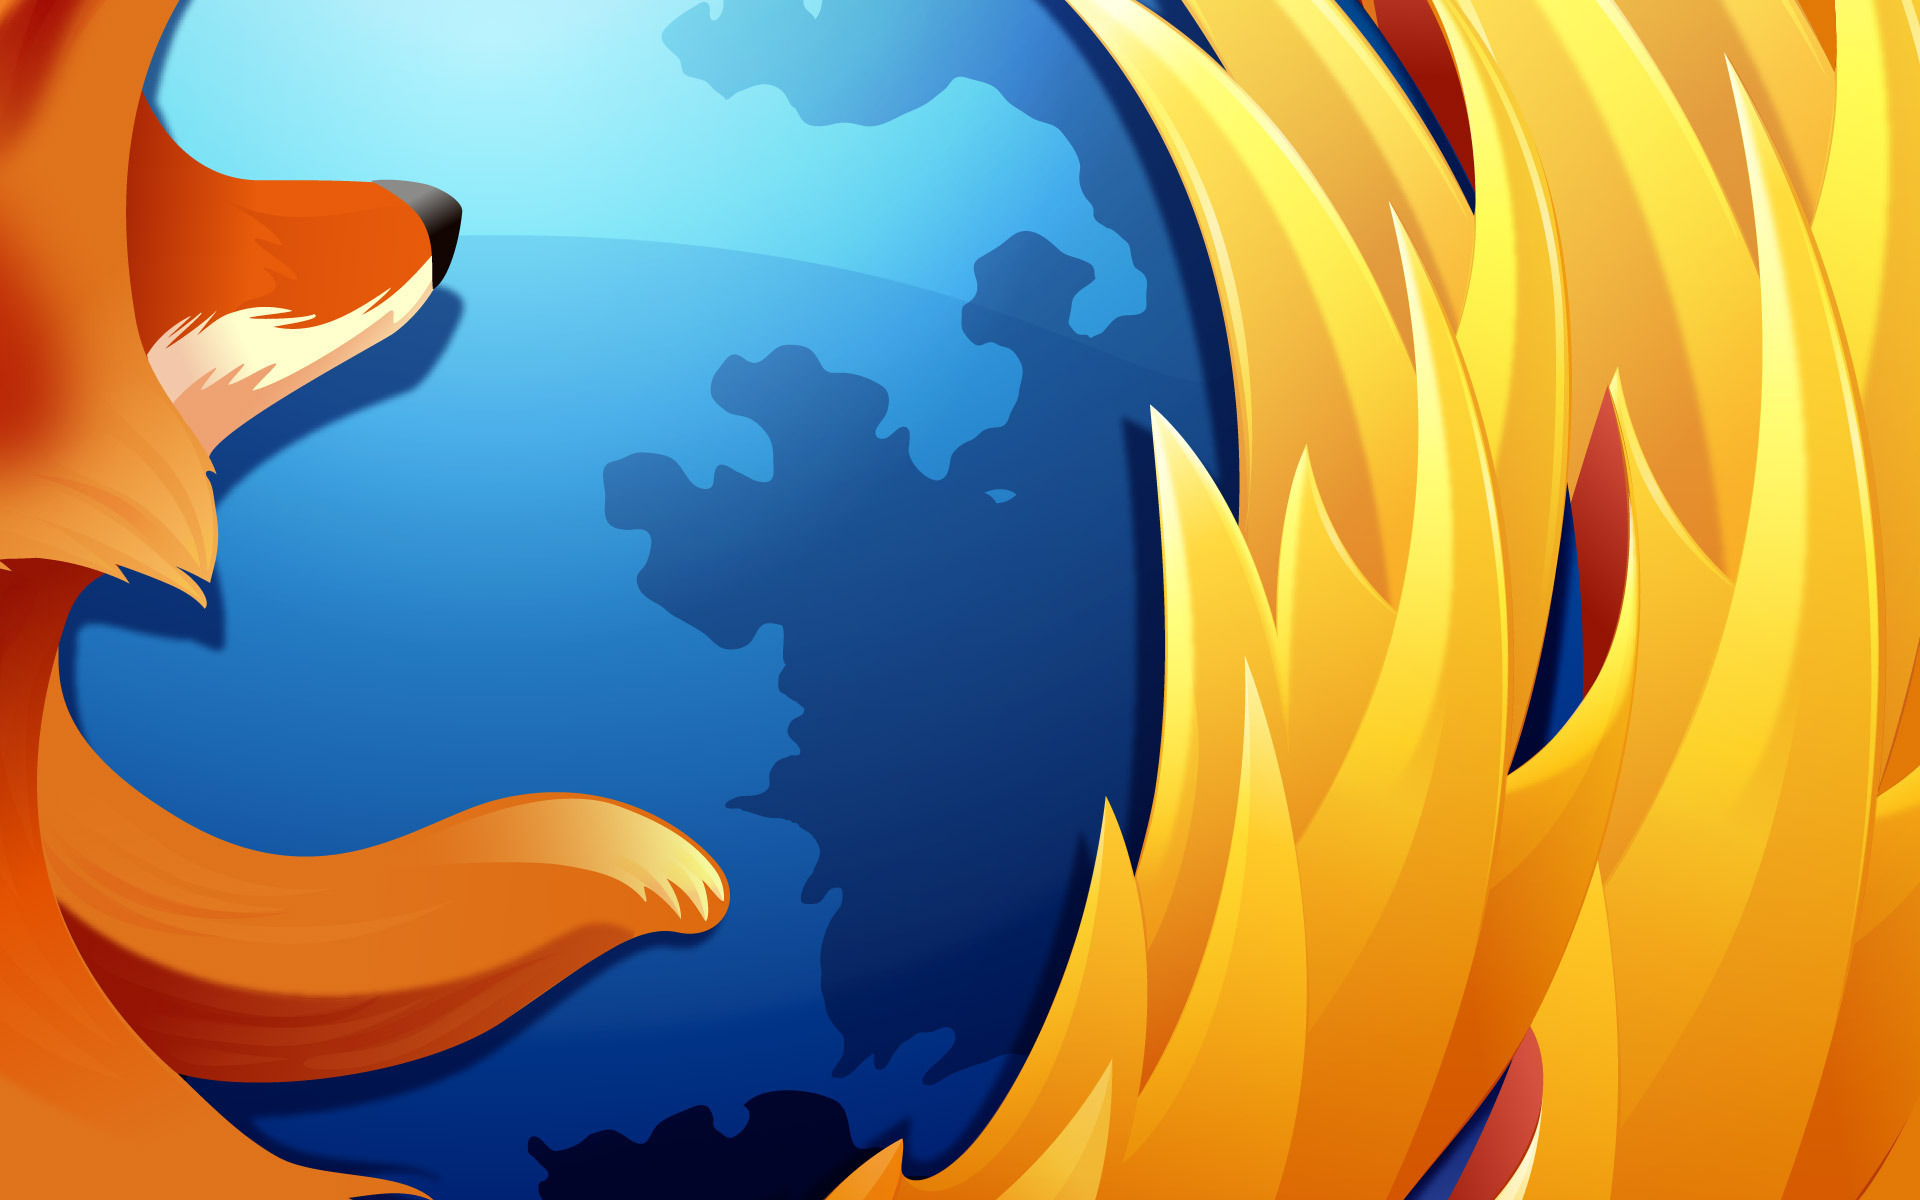 Free Download Wallpapers Firefox Mozilla Desktop Animal Computers 19x10 19x10 For Your Desktop Mobile Tablet Explore 48 Mozilla Firefox Wallpaper For Computer Mozilla Firefox Wallpaper For Computer Mozilla Firefox